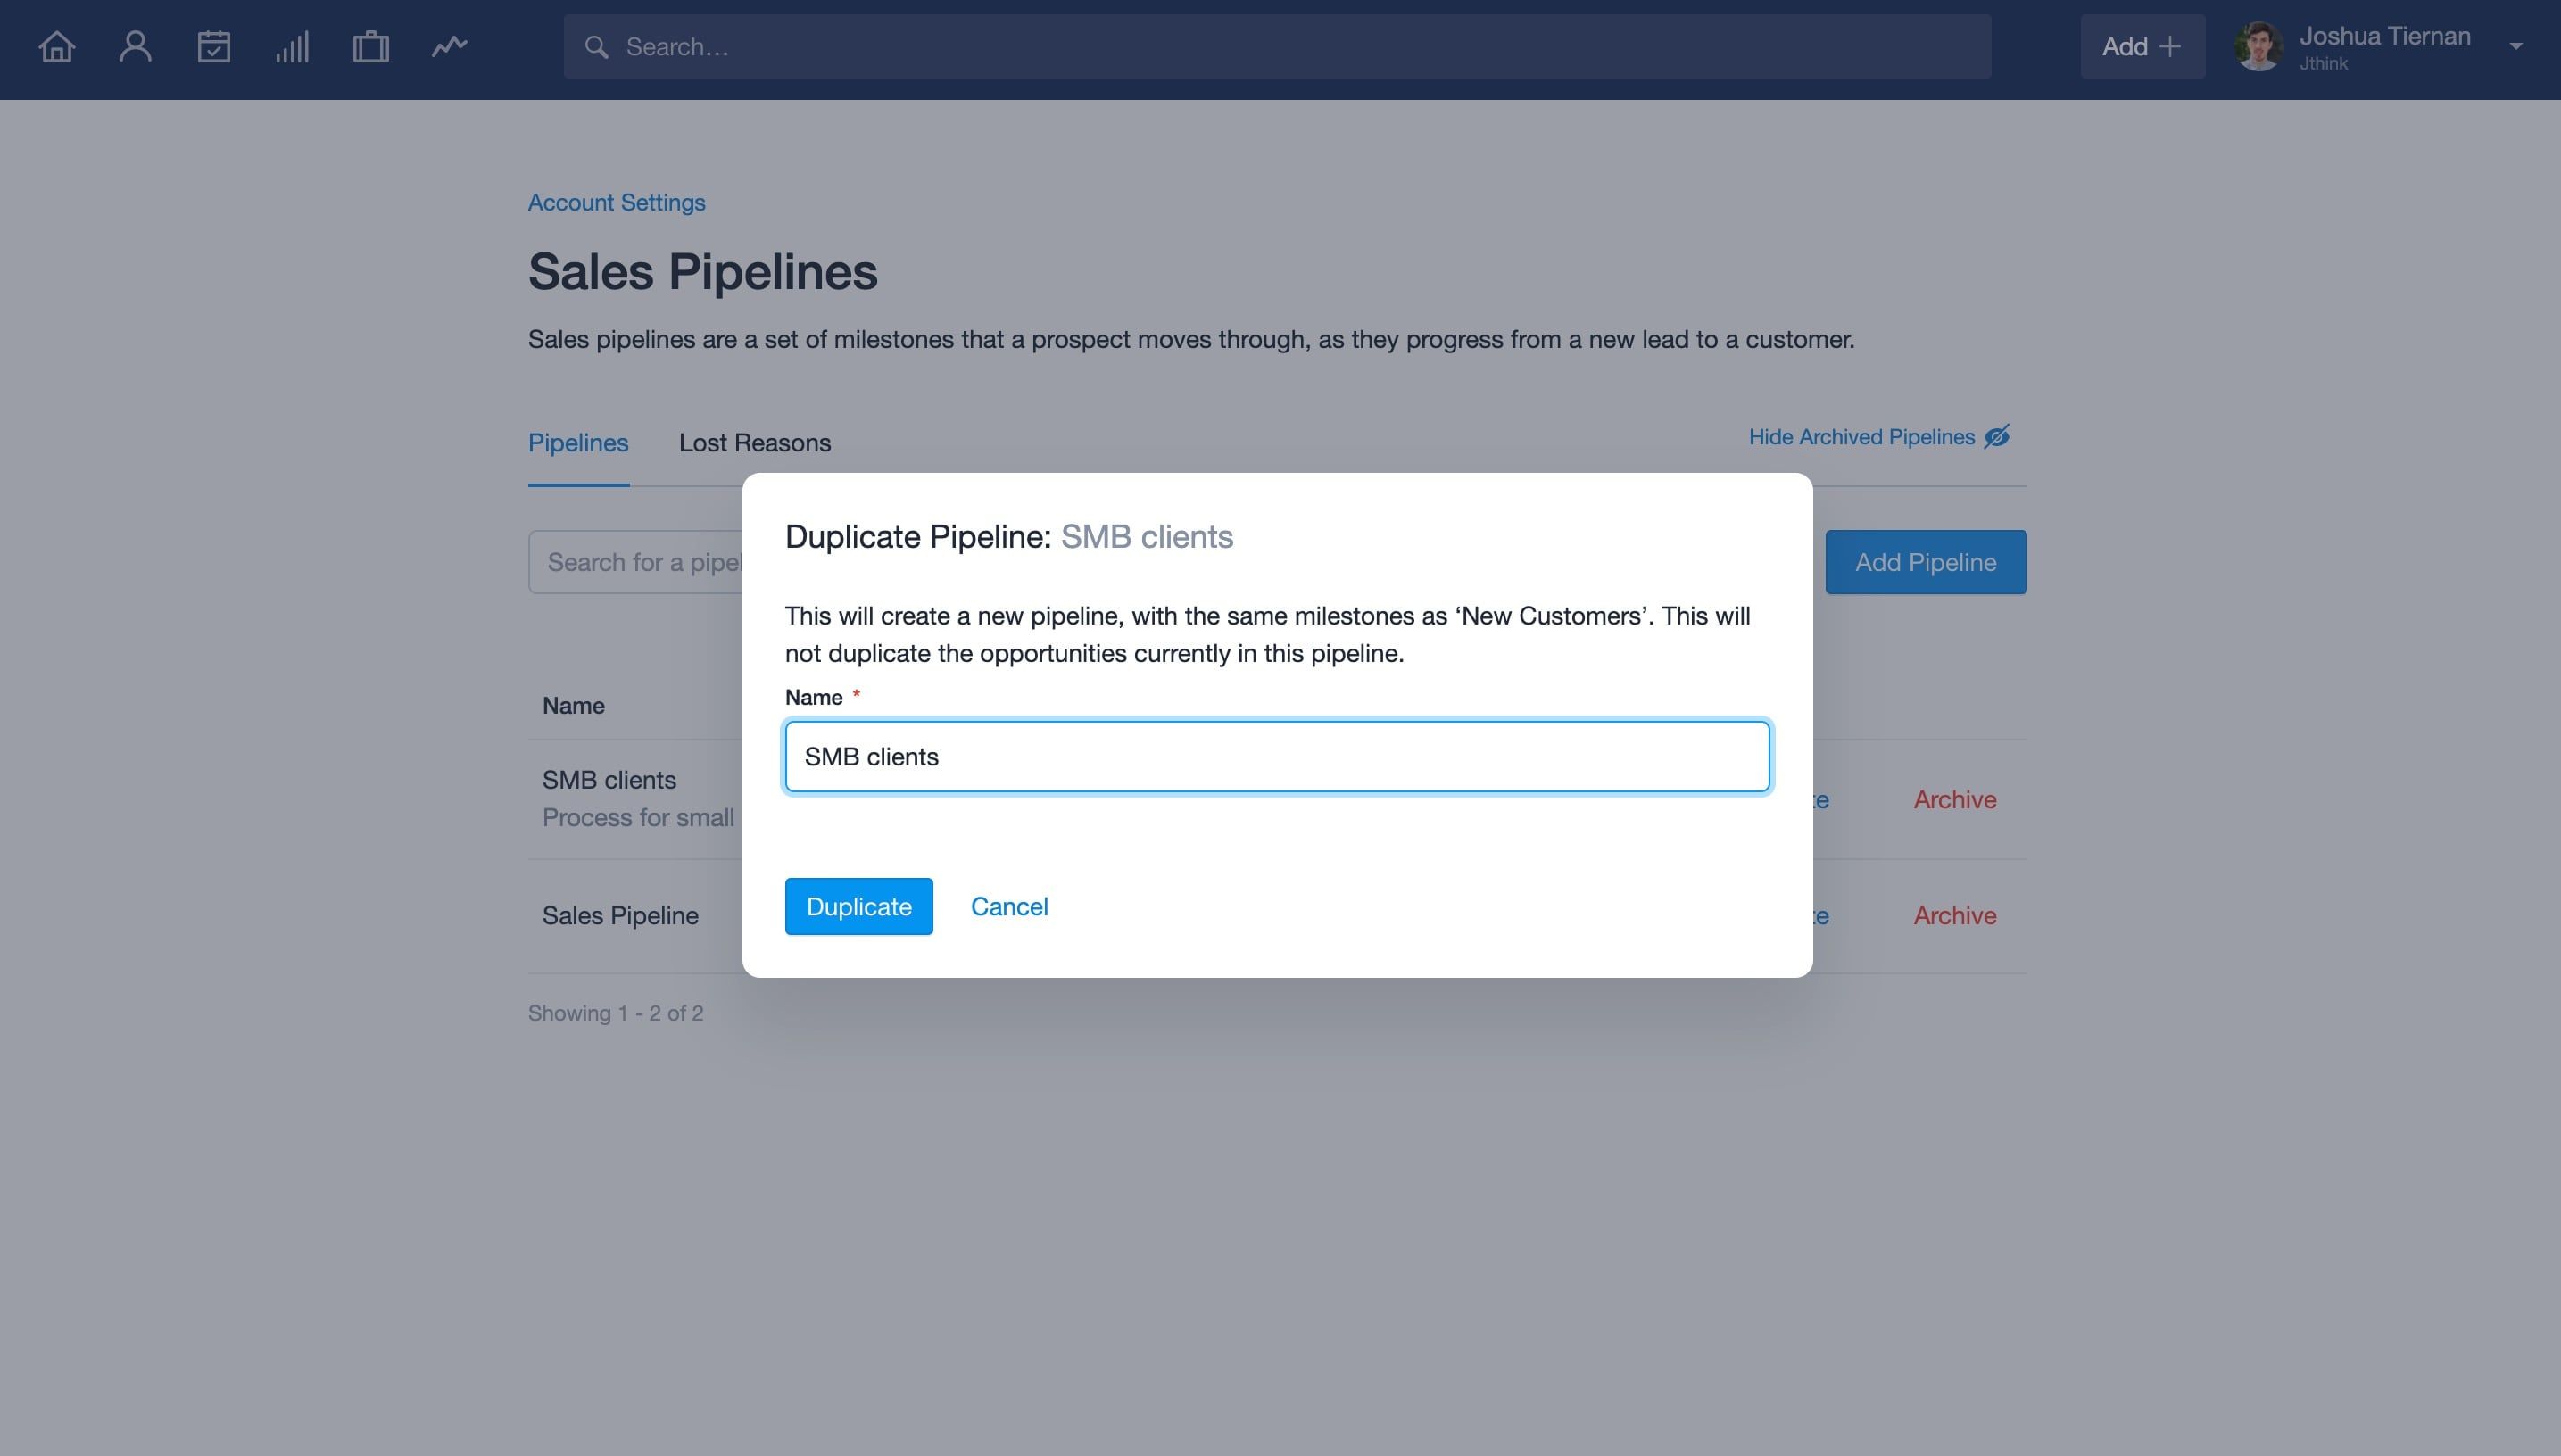 Duplicating a pipeline